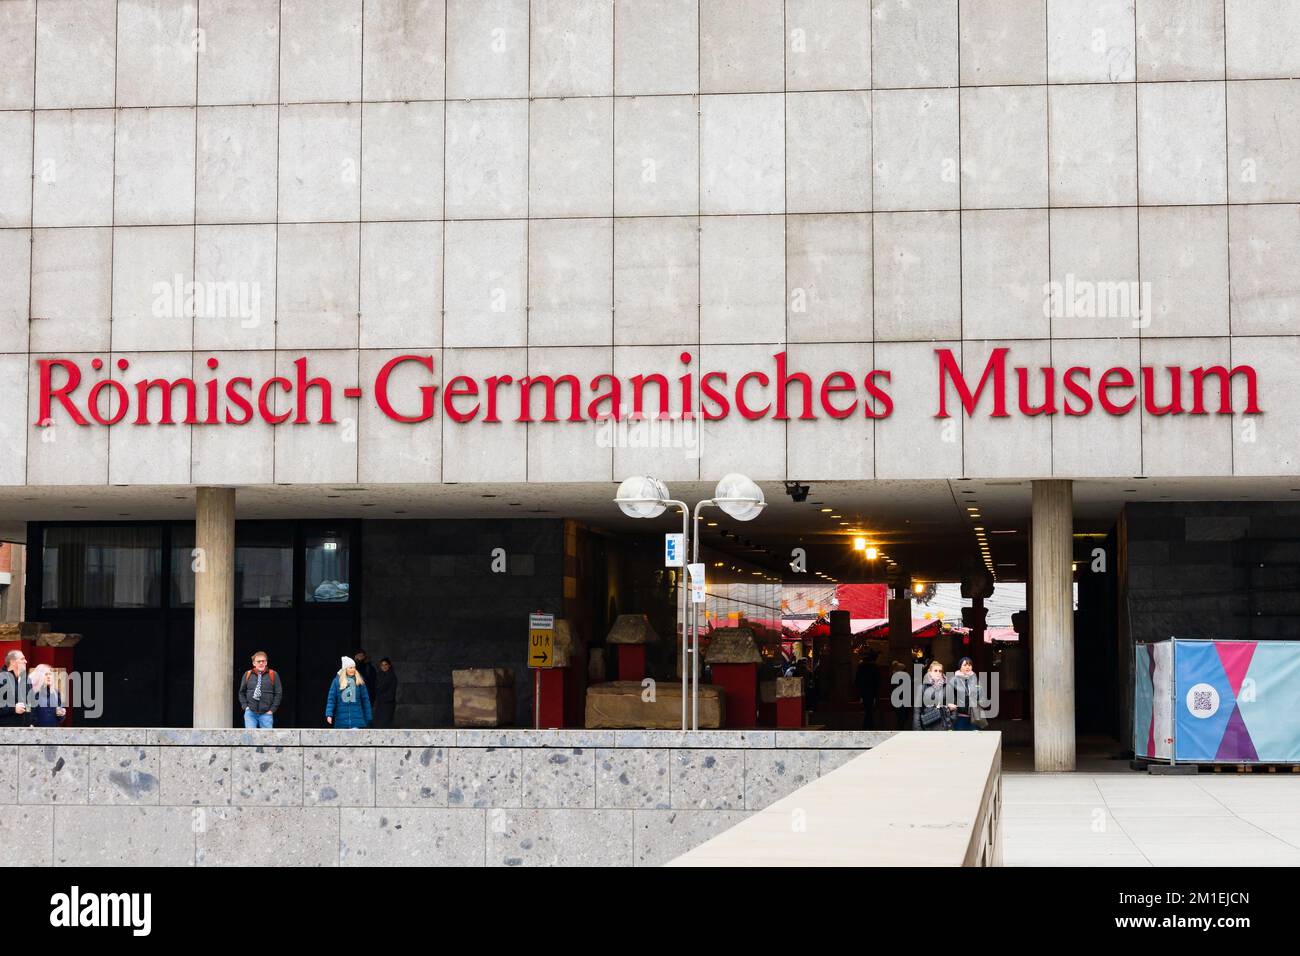 Facade of the Romisch-Germanisches Museum, Koln Cologne Germany Stock Photo